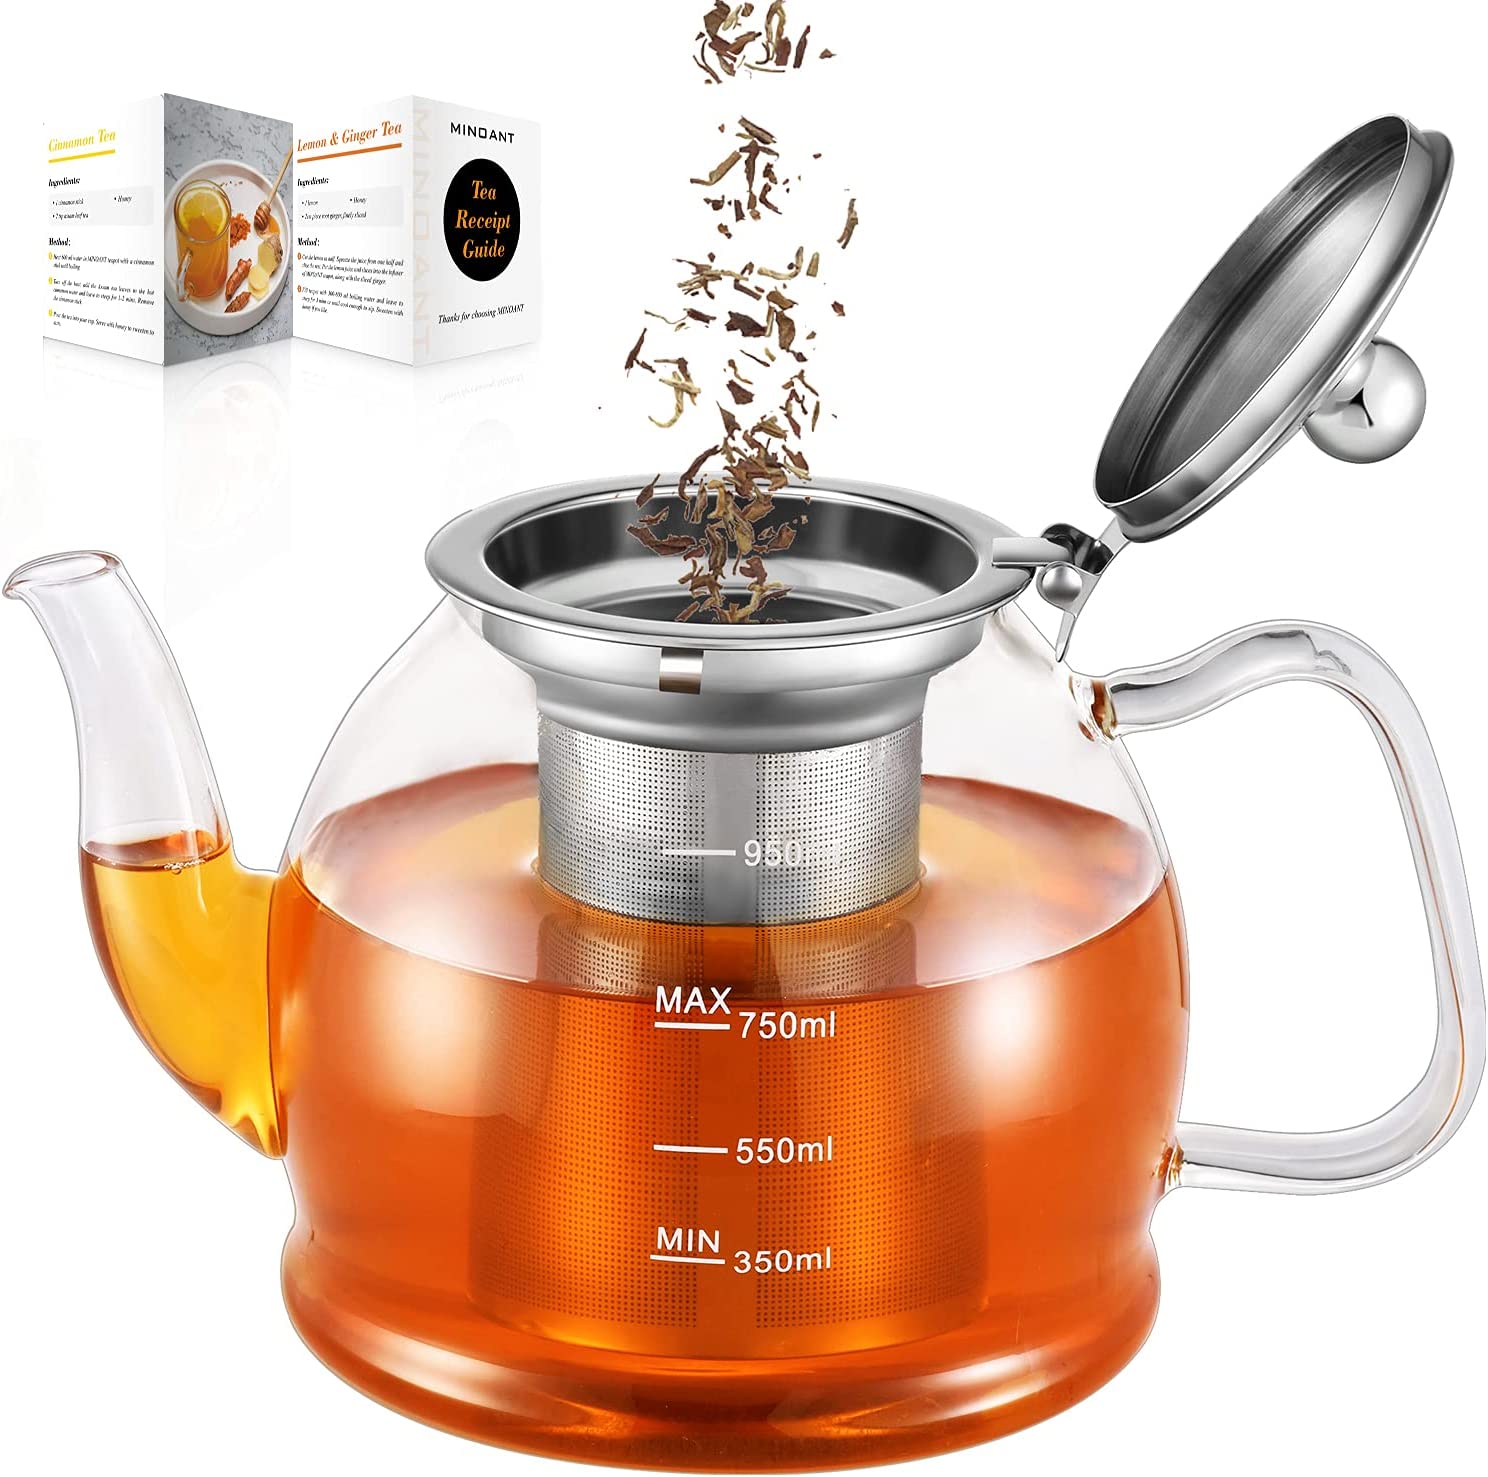 MINO ANT Glass Teapot 1000 ml Teapot with Strainer Insert, Borosilicate Glass Tea Service, Glass Teapot with Strainer Insert, Teapot with Strainer, Tea Infuser for Loose Leaves Teapot - Dishwasher Safe